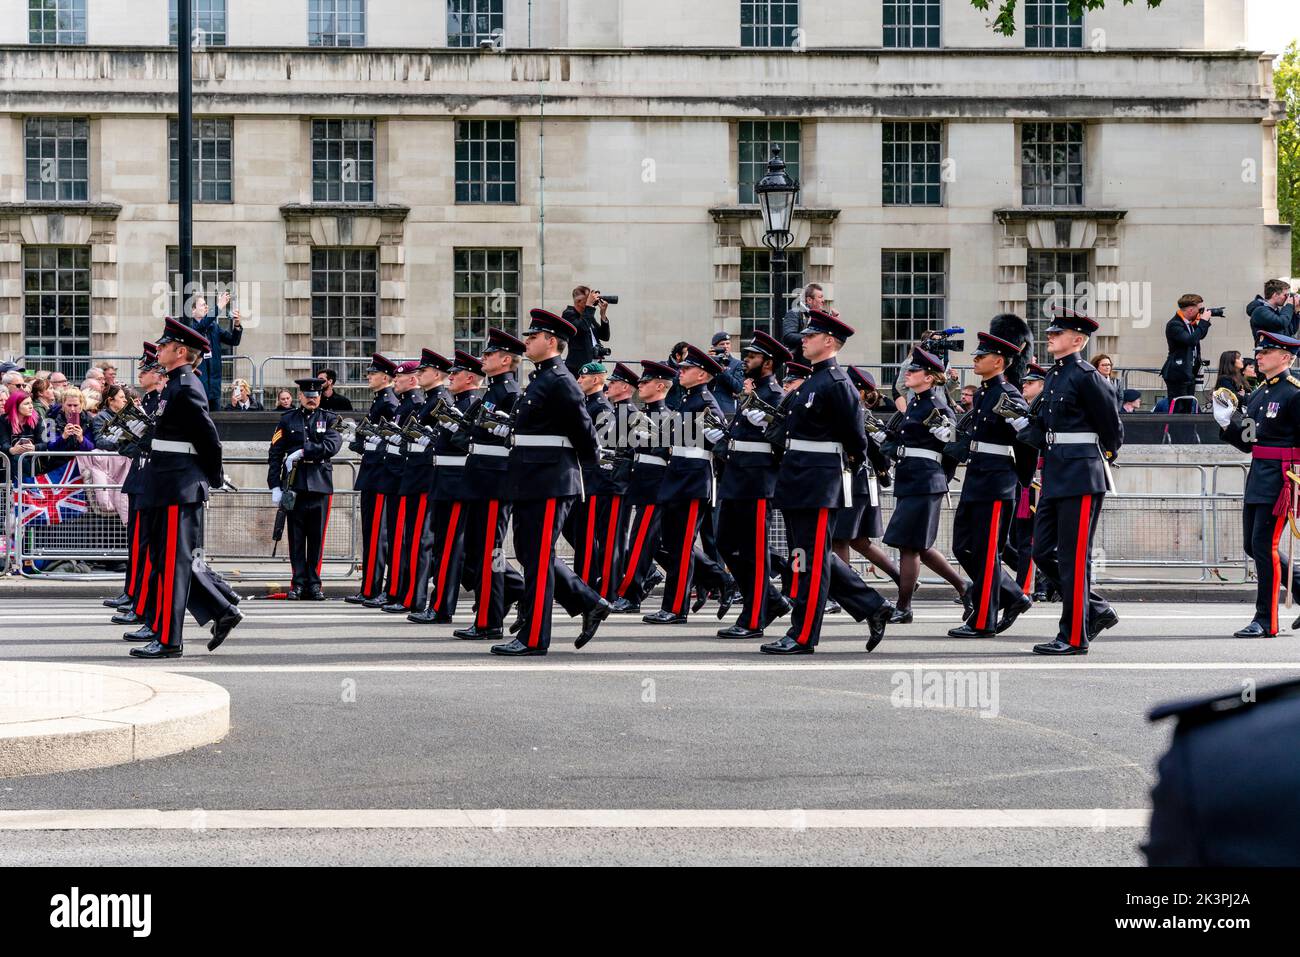 Members Of The British Military Take Part In Queen Elizabeth II Funeral Procession, Whitehall, London, UK. Stock Photo